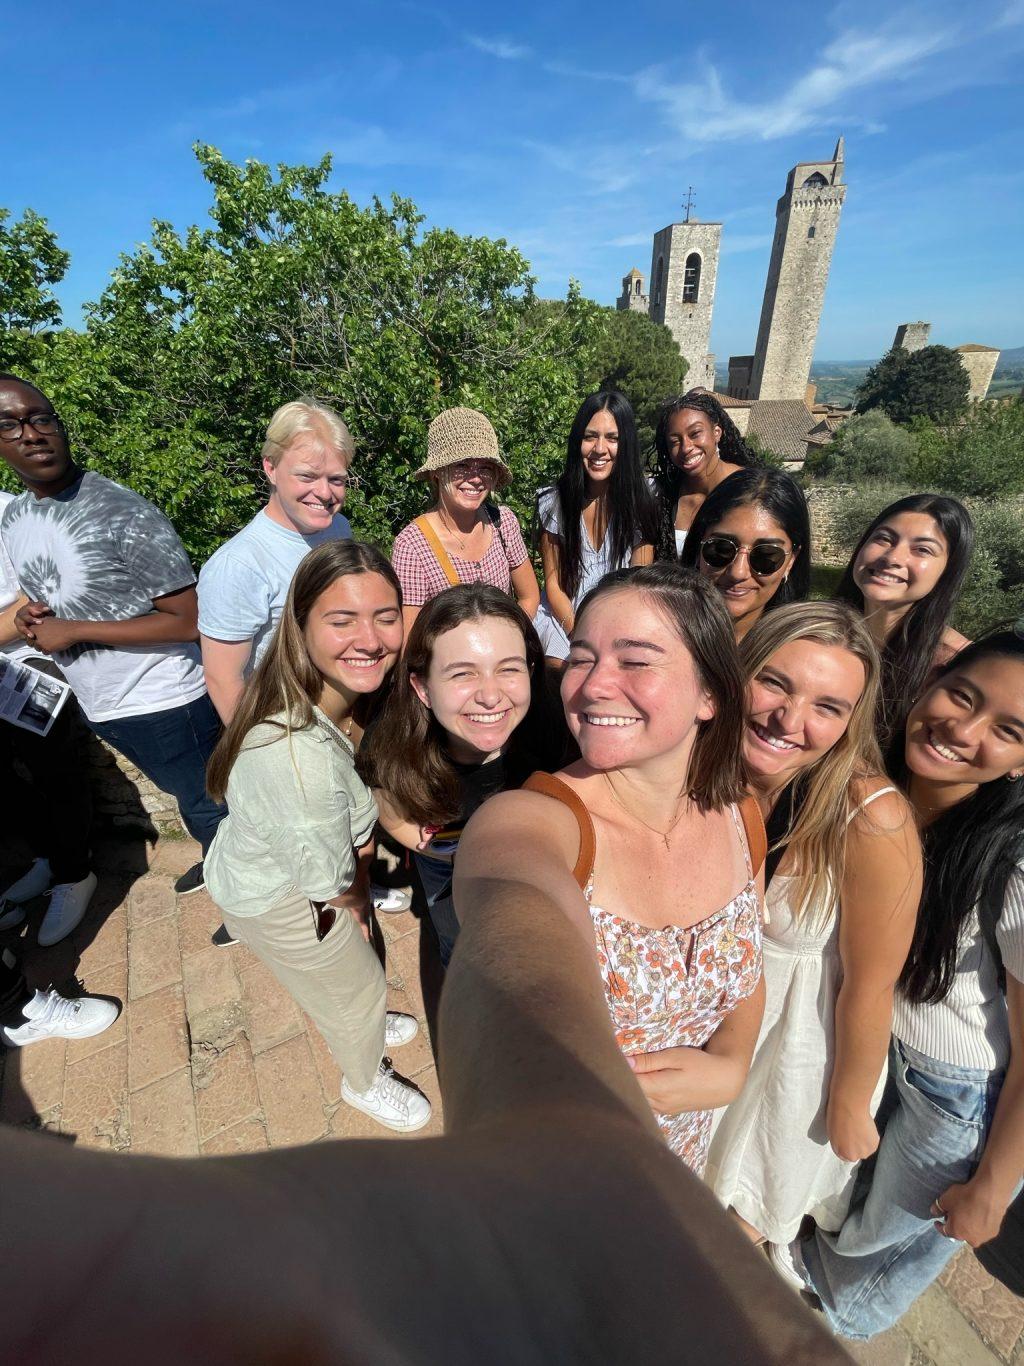 Members of the Florence May GE program take a picture in San Gimignano, Italy during a group day-excursion. The Florence program starts with a few faculty-led day-trips to show students the surrounding areas.